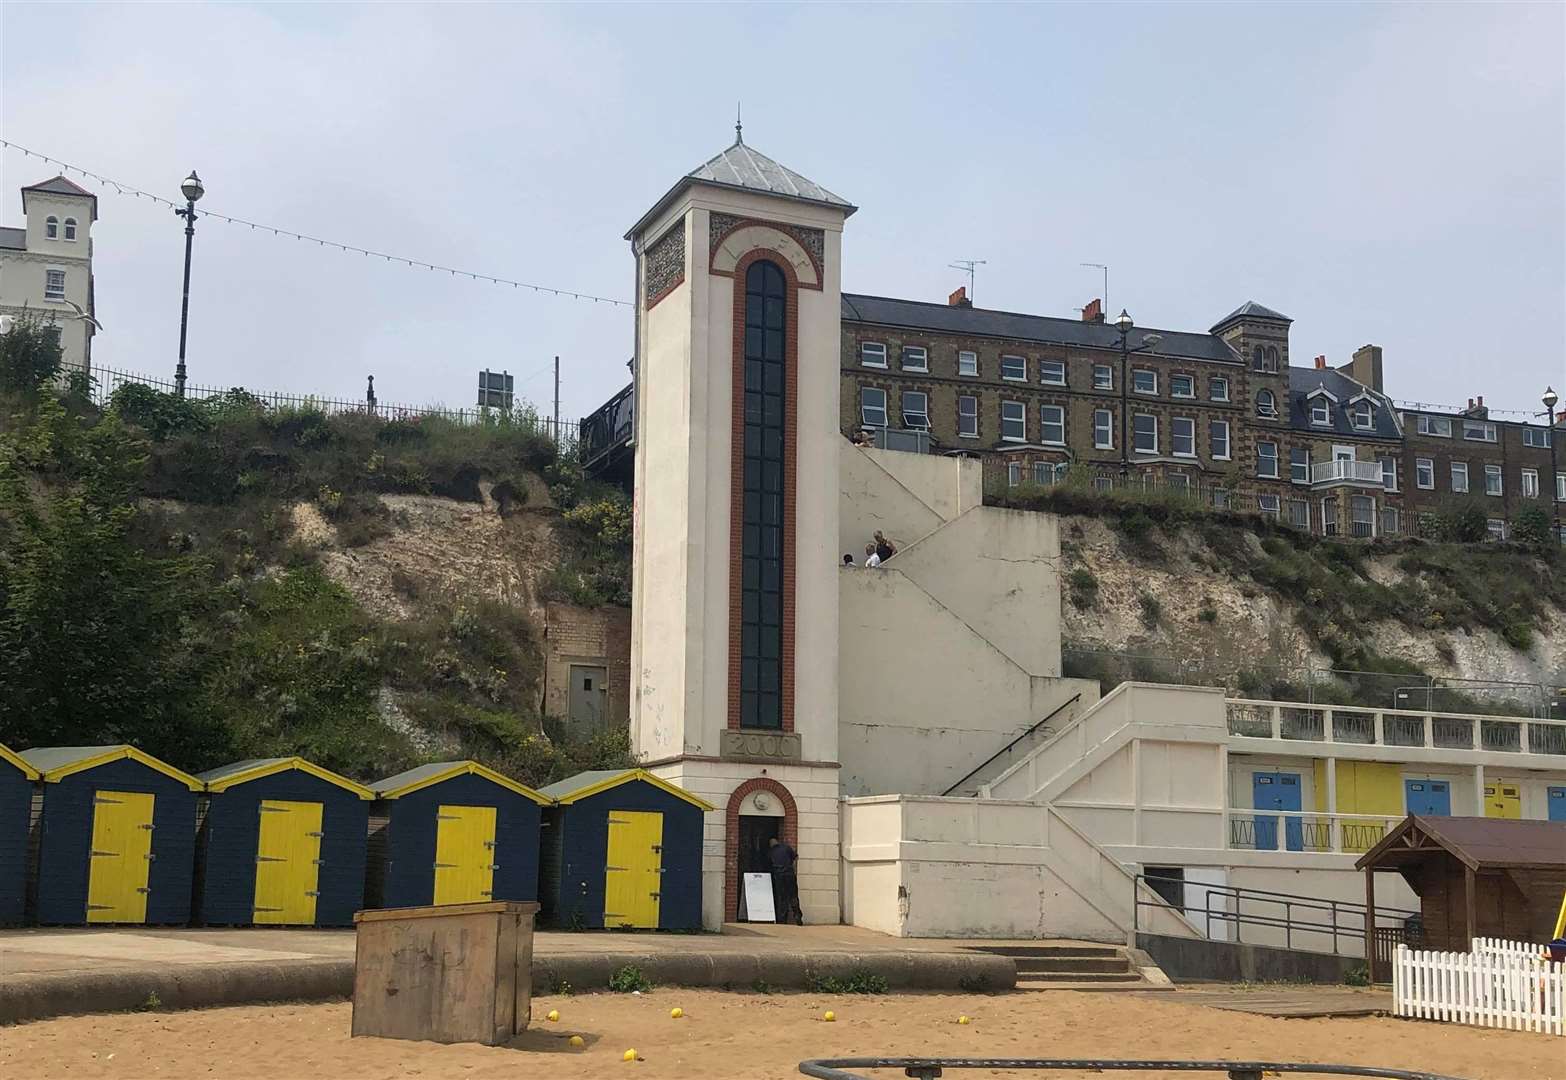 The Viking Bay lift in Broadstairs (16216974)